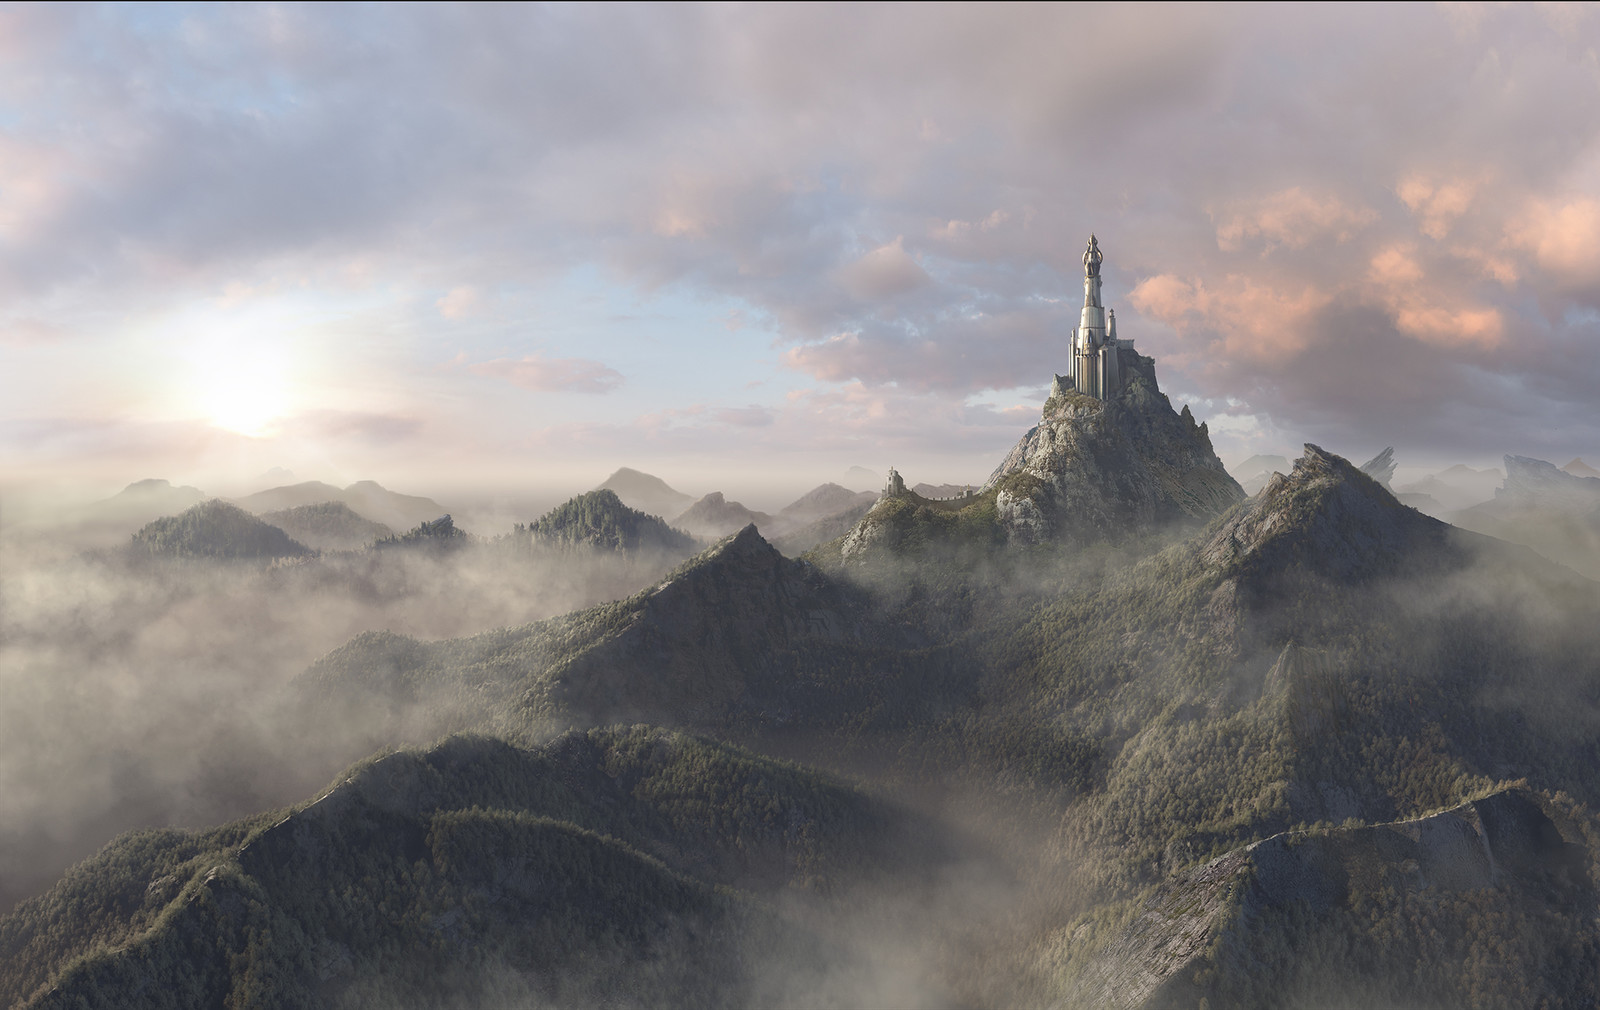 Concept &amp; Matte painting background